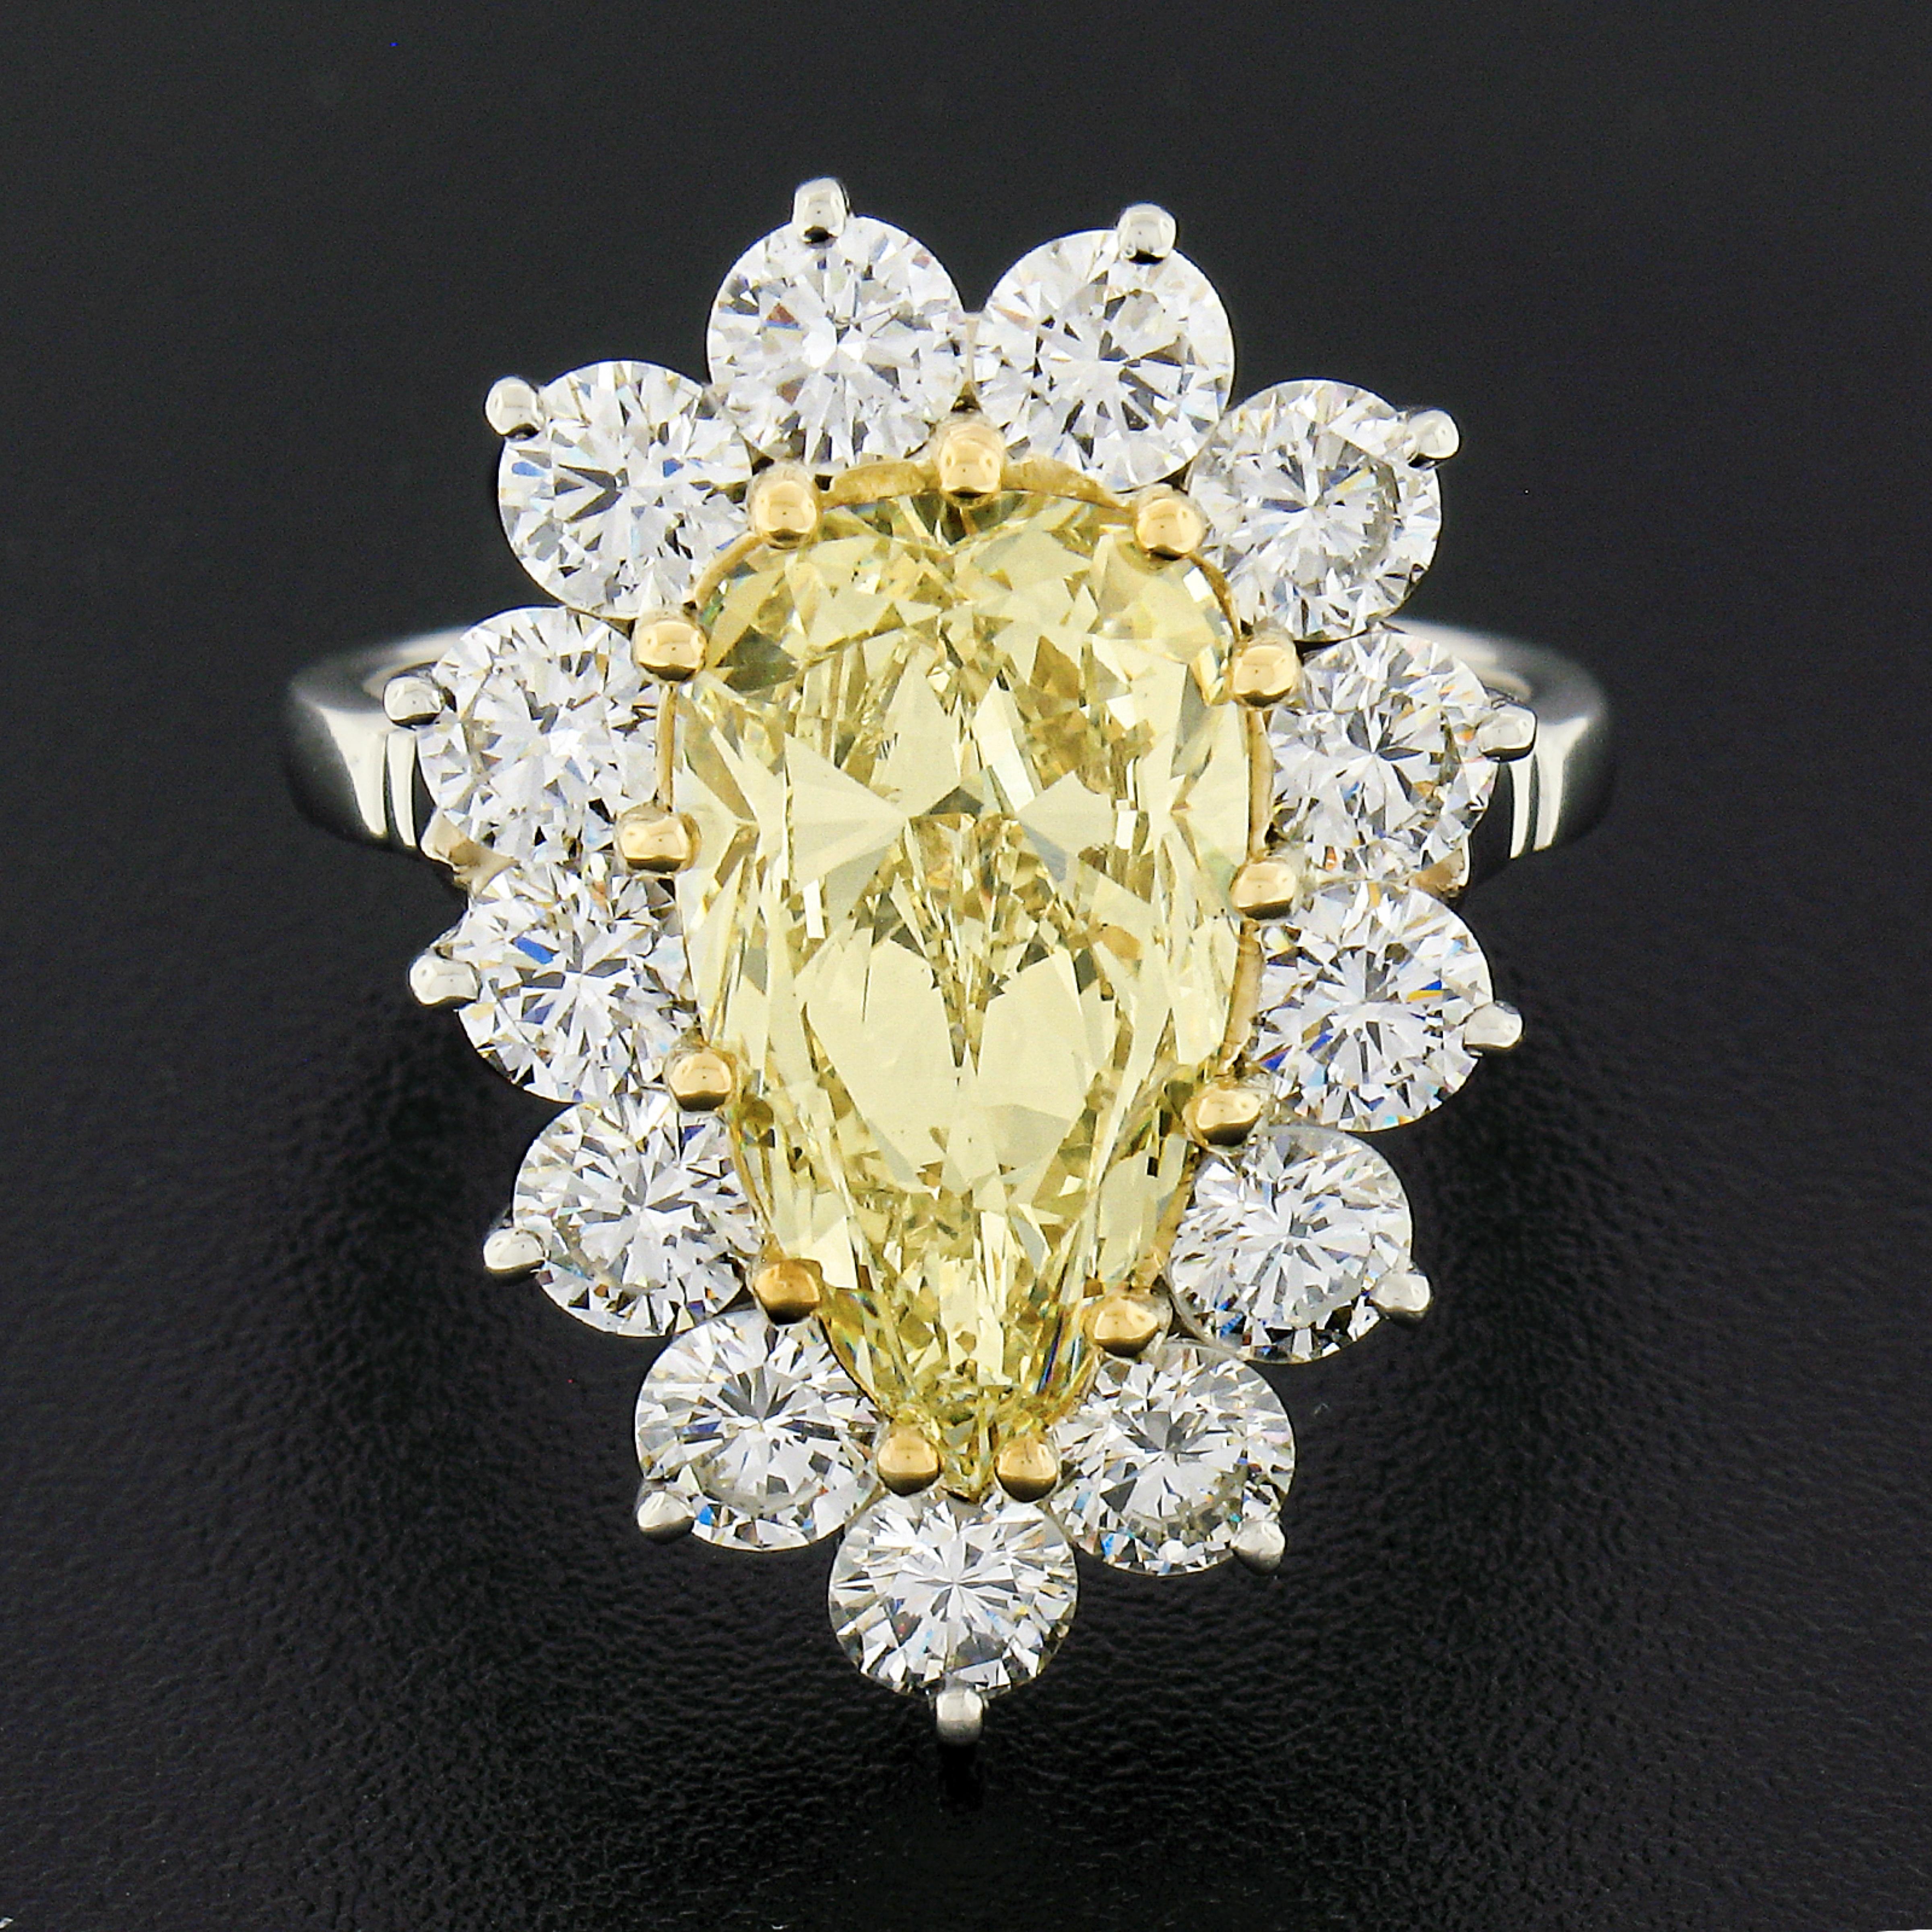 You are looking at a truly breathtaking custom designed engagement ring that is newly handcrafted from solid platinum with an 18k yellow gold center basket and prongs that carries a STUNNING, GIA certified, fancy light yellow diamond. This